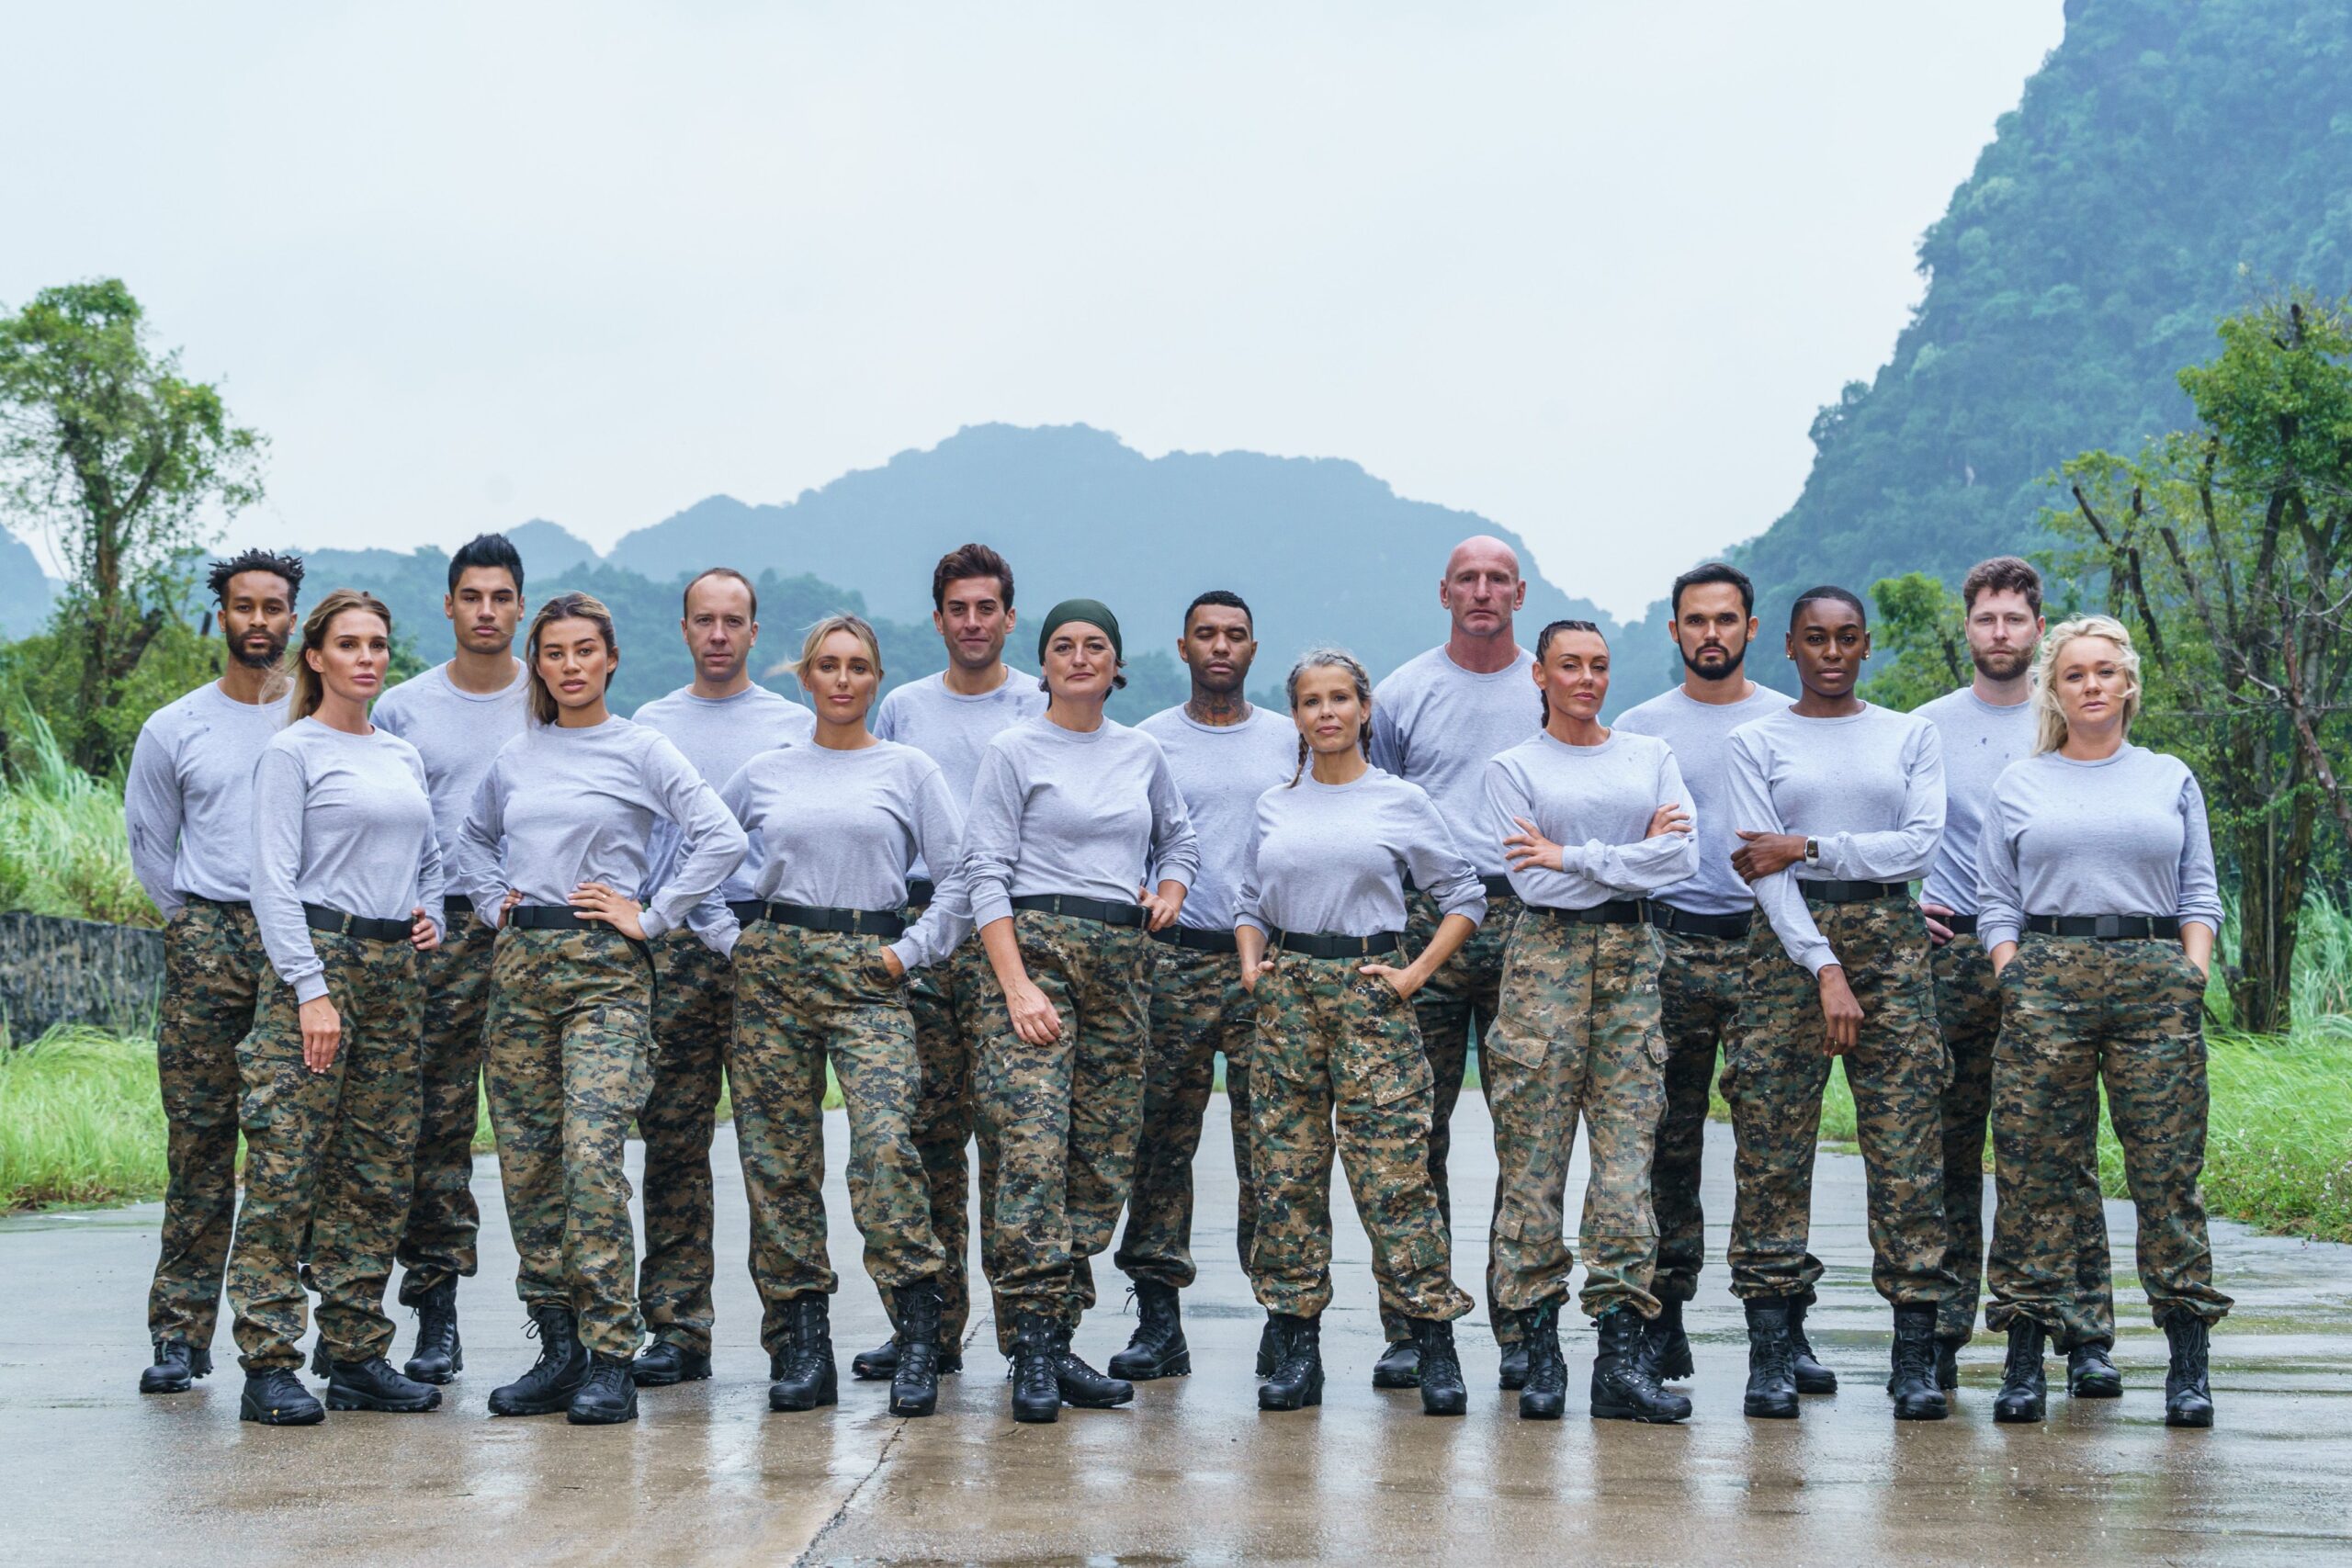 CELEBRITY SAS: WHO DARES WINS IS BACK AS SIXTEEN NEW CELEBRITIES FACE THEIR TOUGHEST CHALLENGE